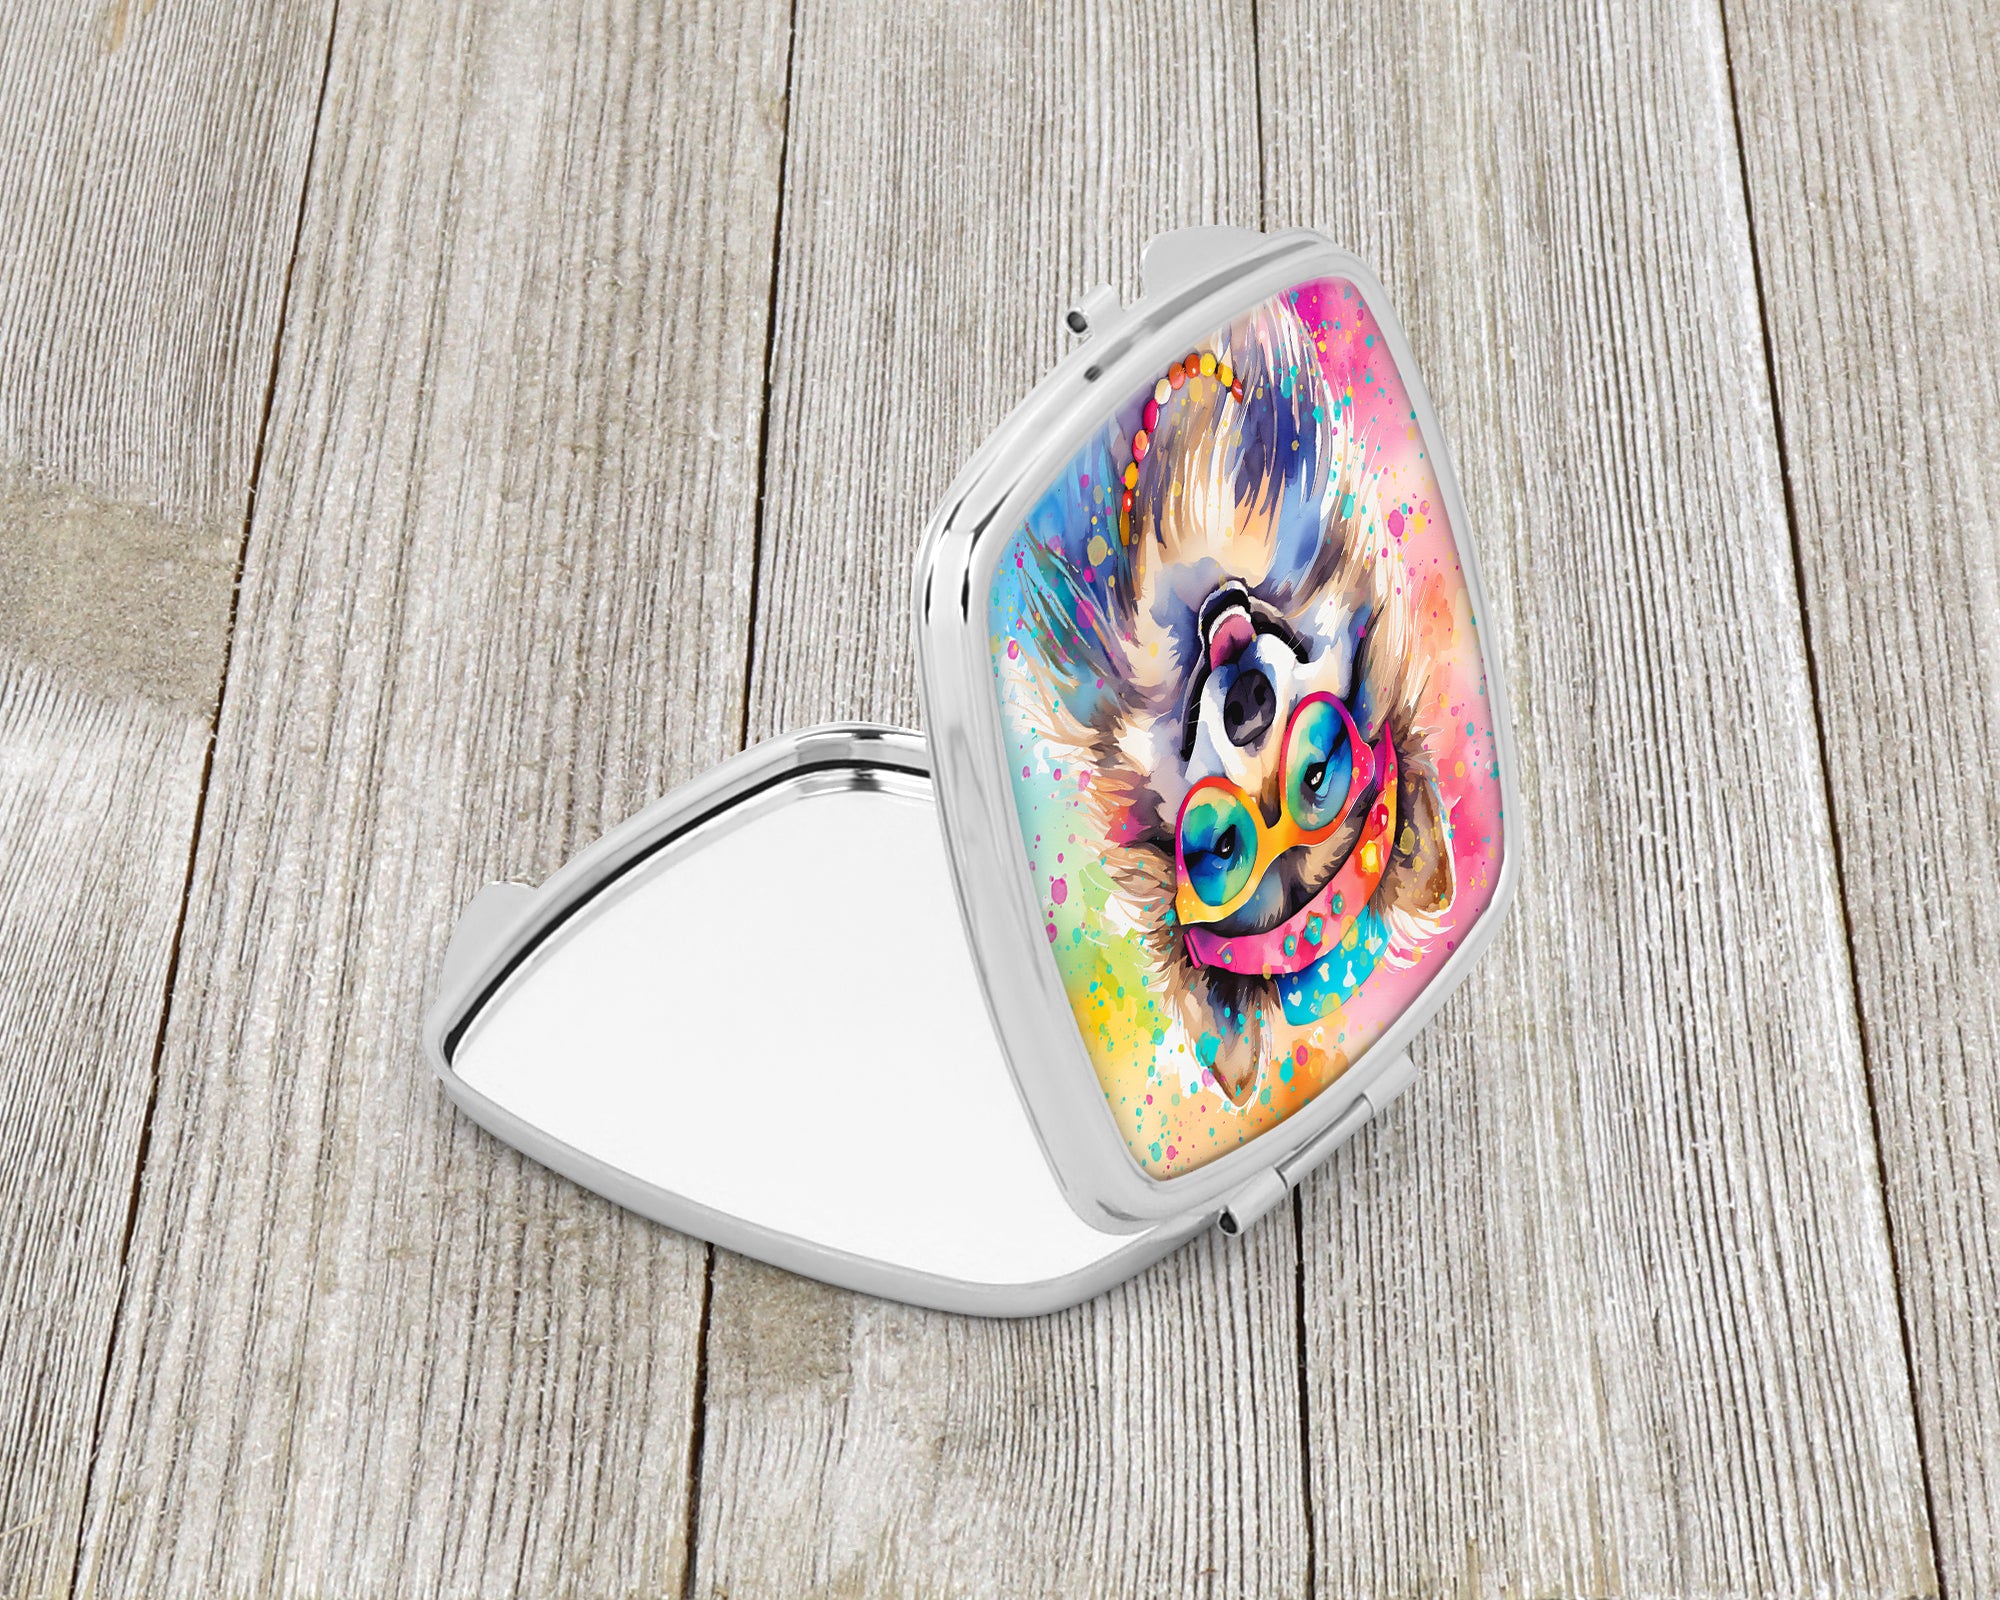 Buy this Keeshond Hippie Dawg Compact Mirror